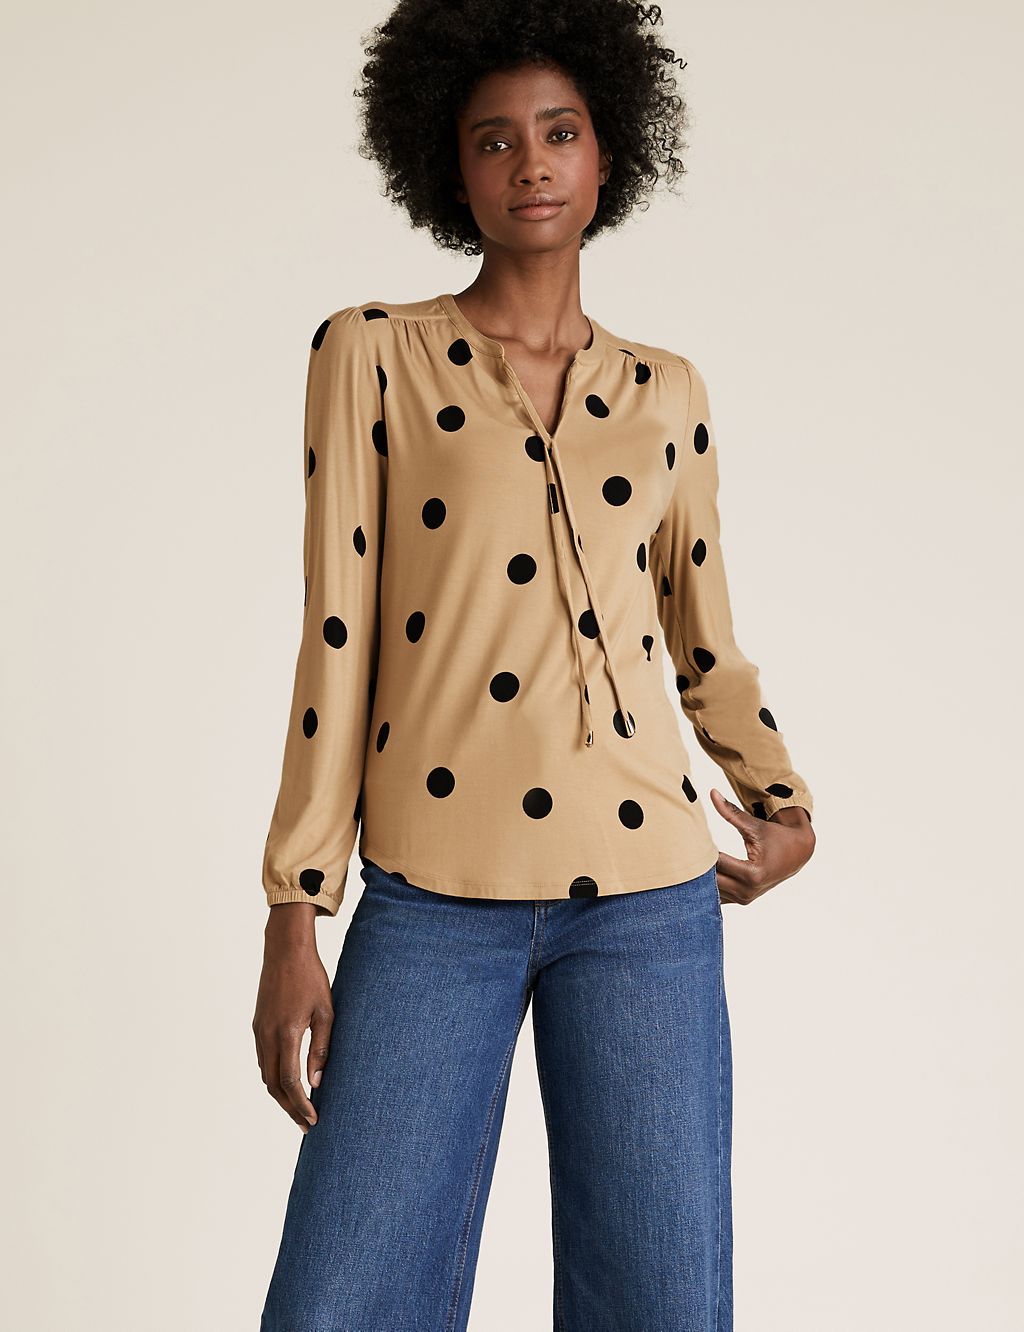 Jersey Polka Dot Tie Neck Relaxed Top 3 of 5